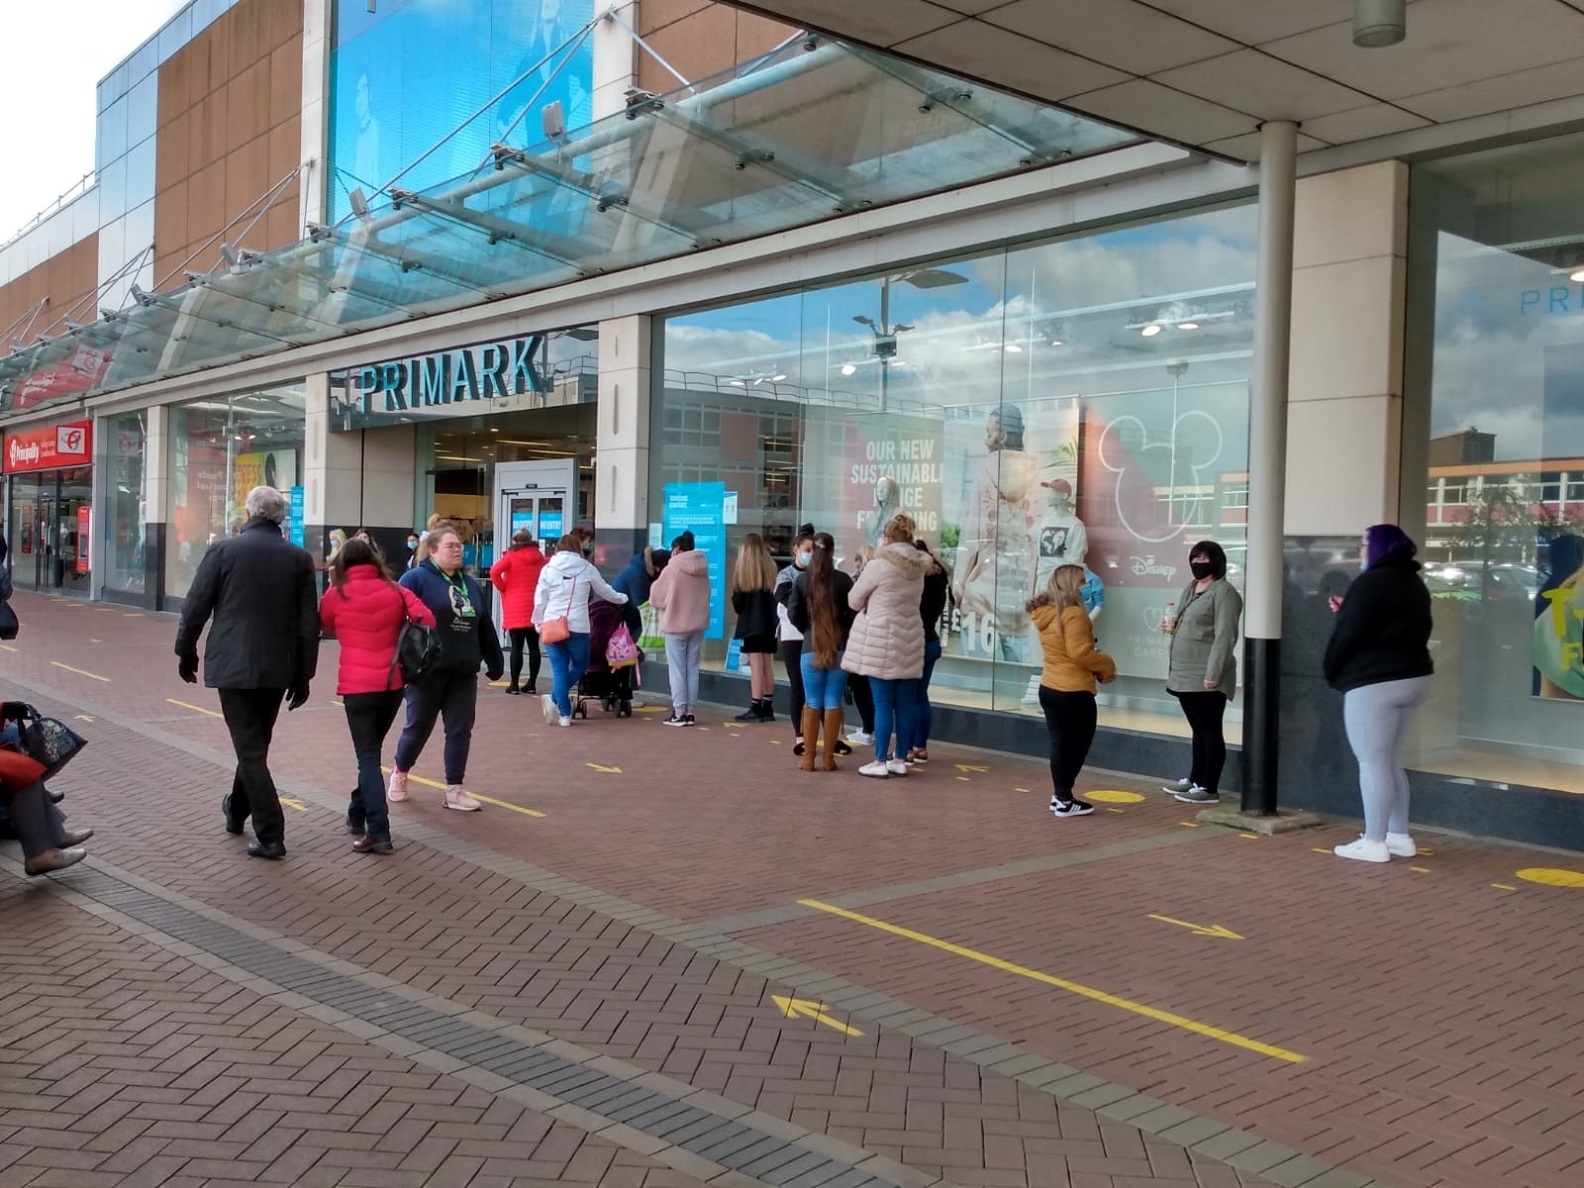  Shoppers queuing for Primark in Cwmbran.